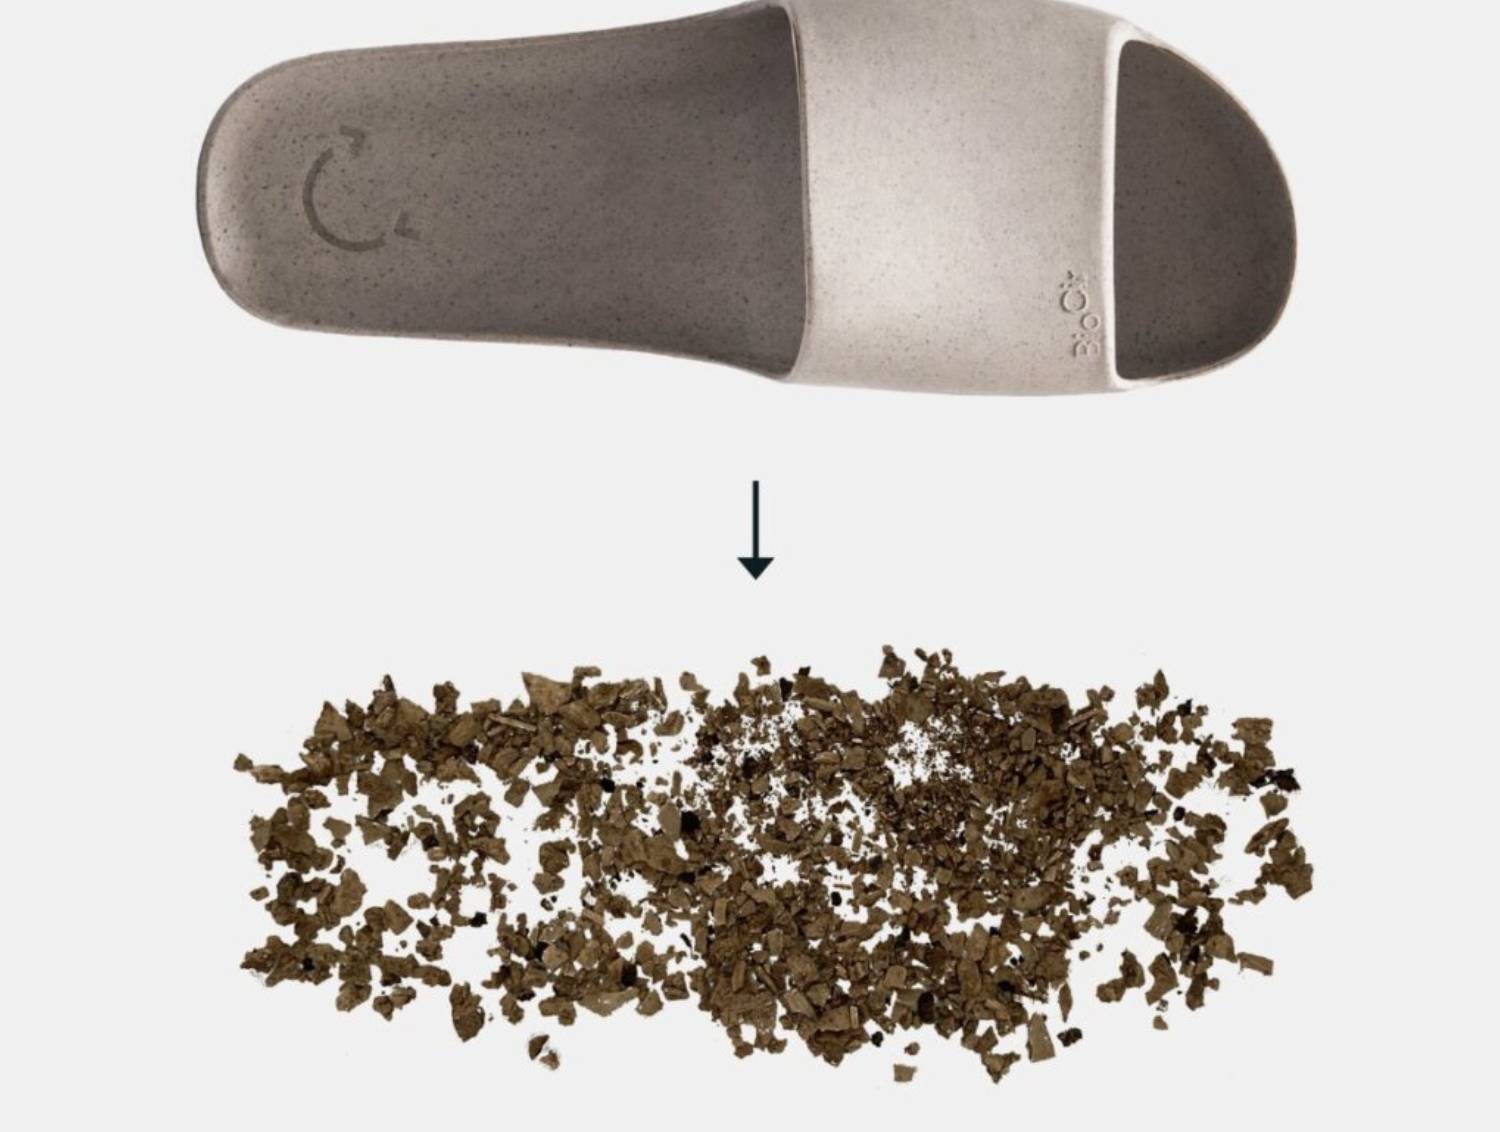 Balena to Reduce Your Plastic Footprint with New Biodegradable Footwear